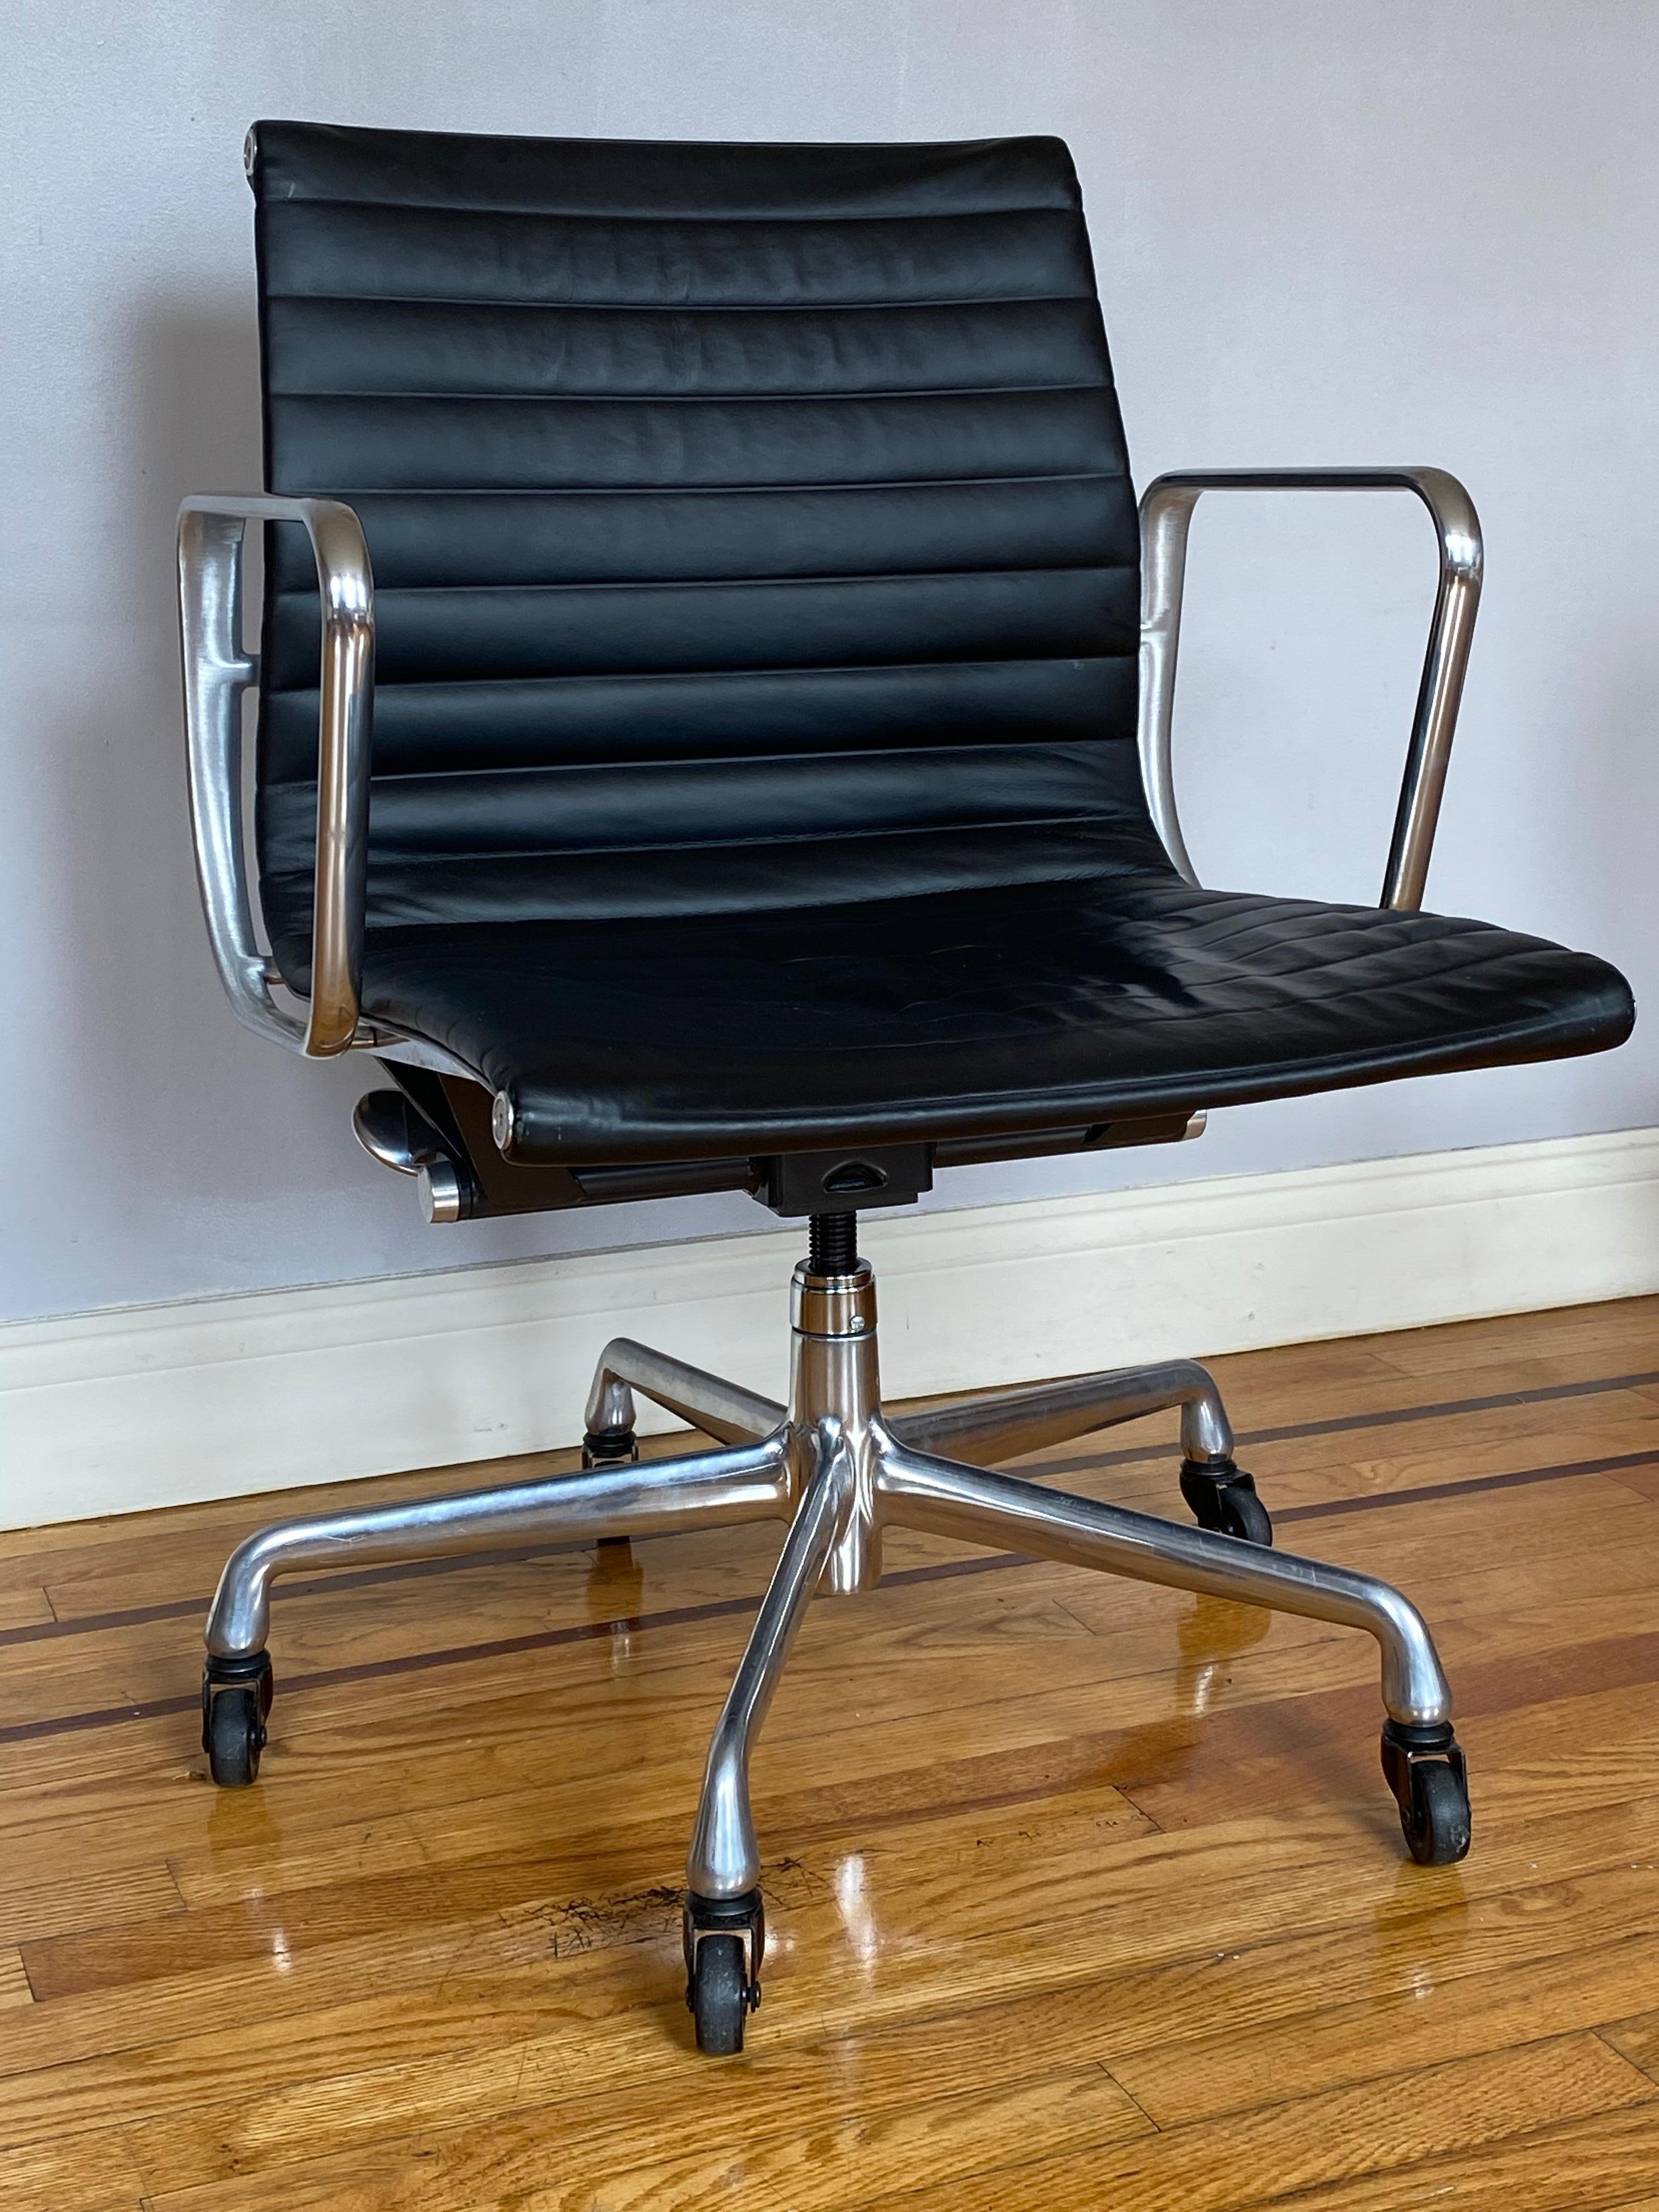 Gorgeous original Herman Miller Eames leather management. Polished aluminum frame with extremely comfortable leather sling seat. Arms with wear from use. Wheels work fine. Signed and stamped.